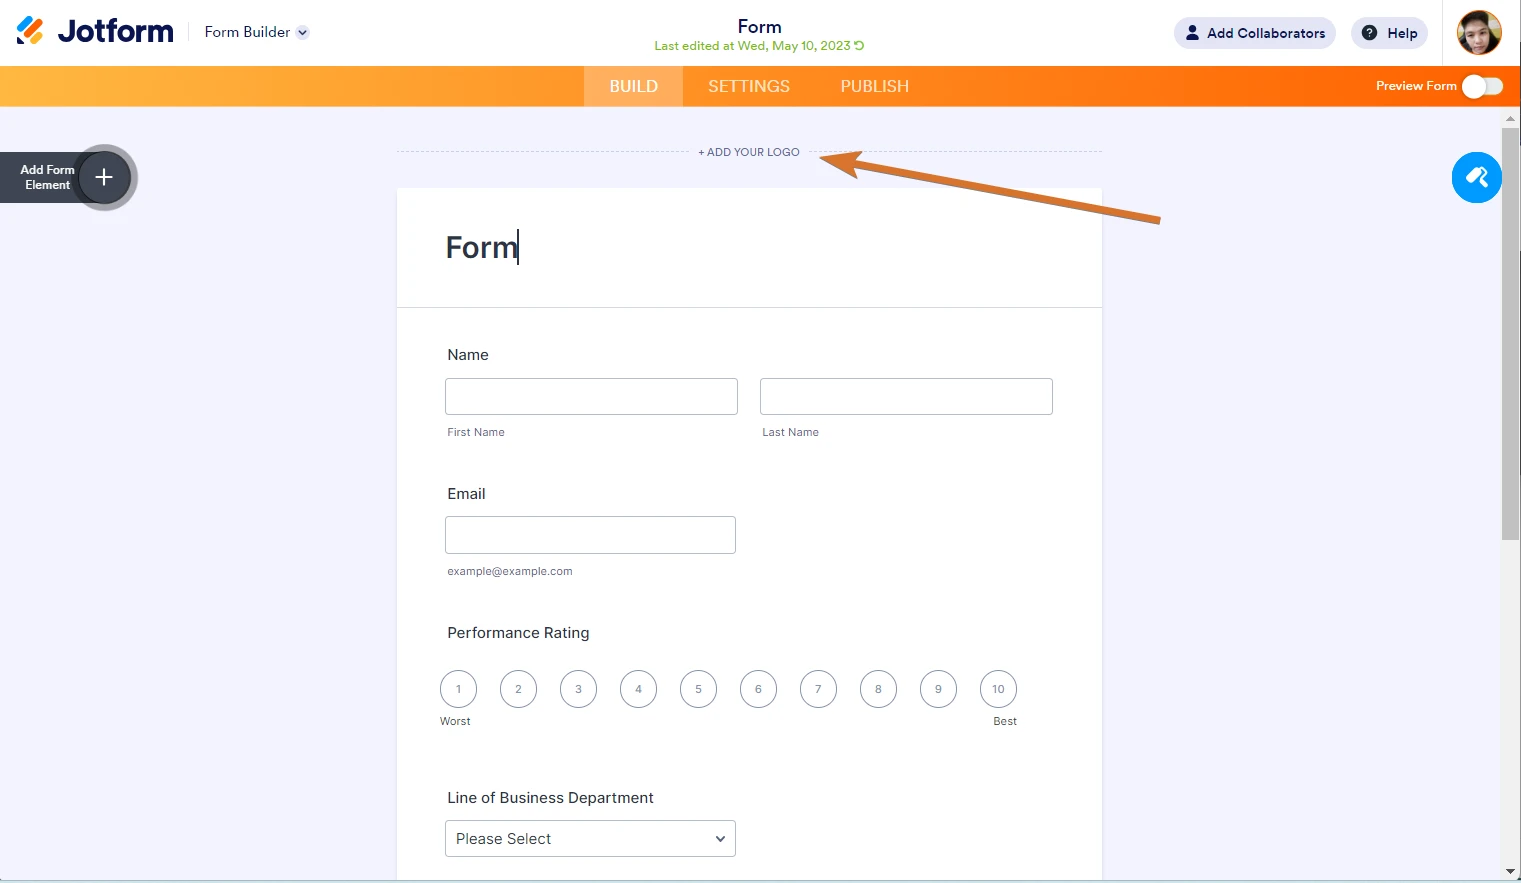 How can I make my own branding on the form? Image 2 Screenshot 61